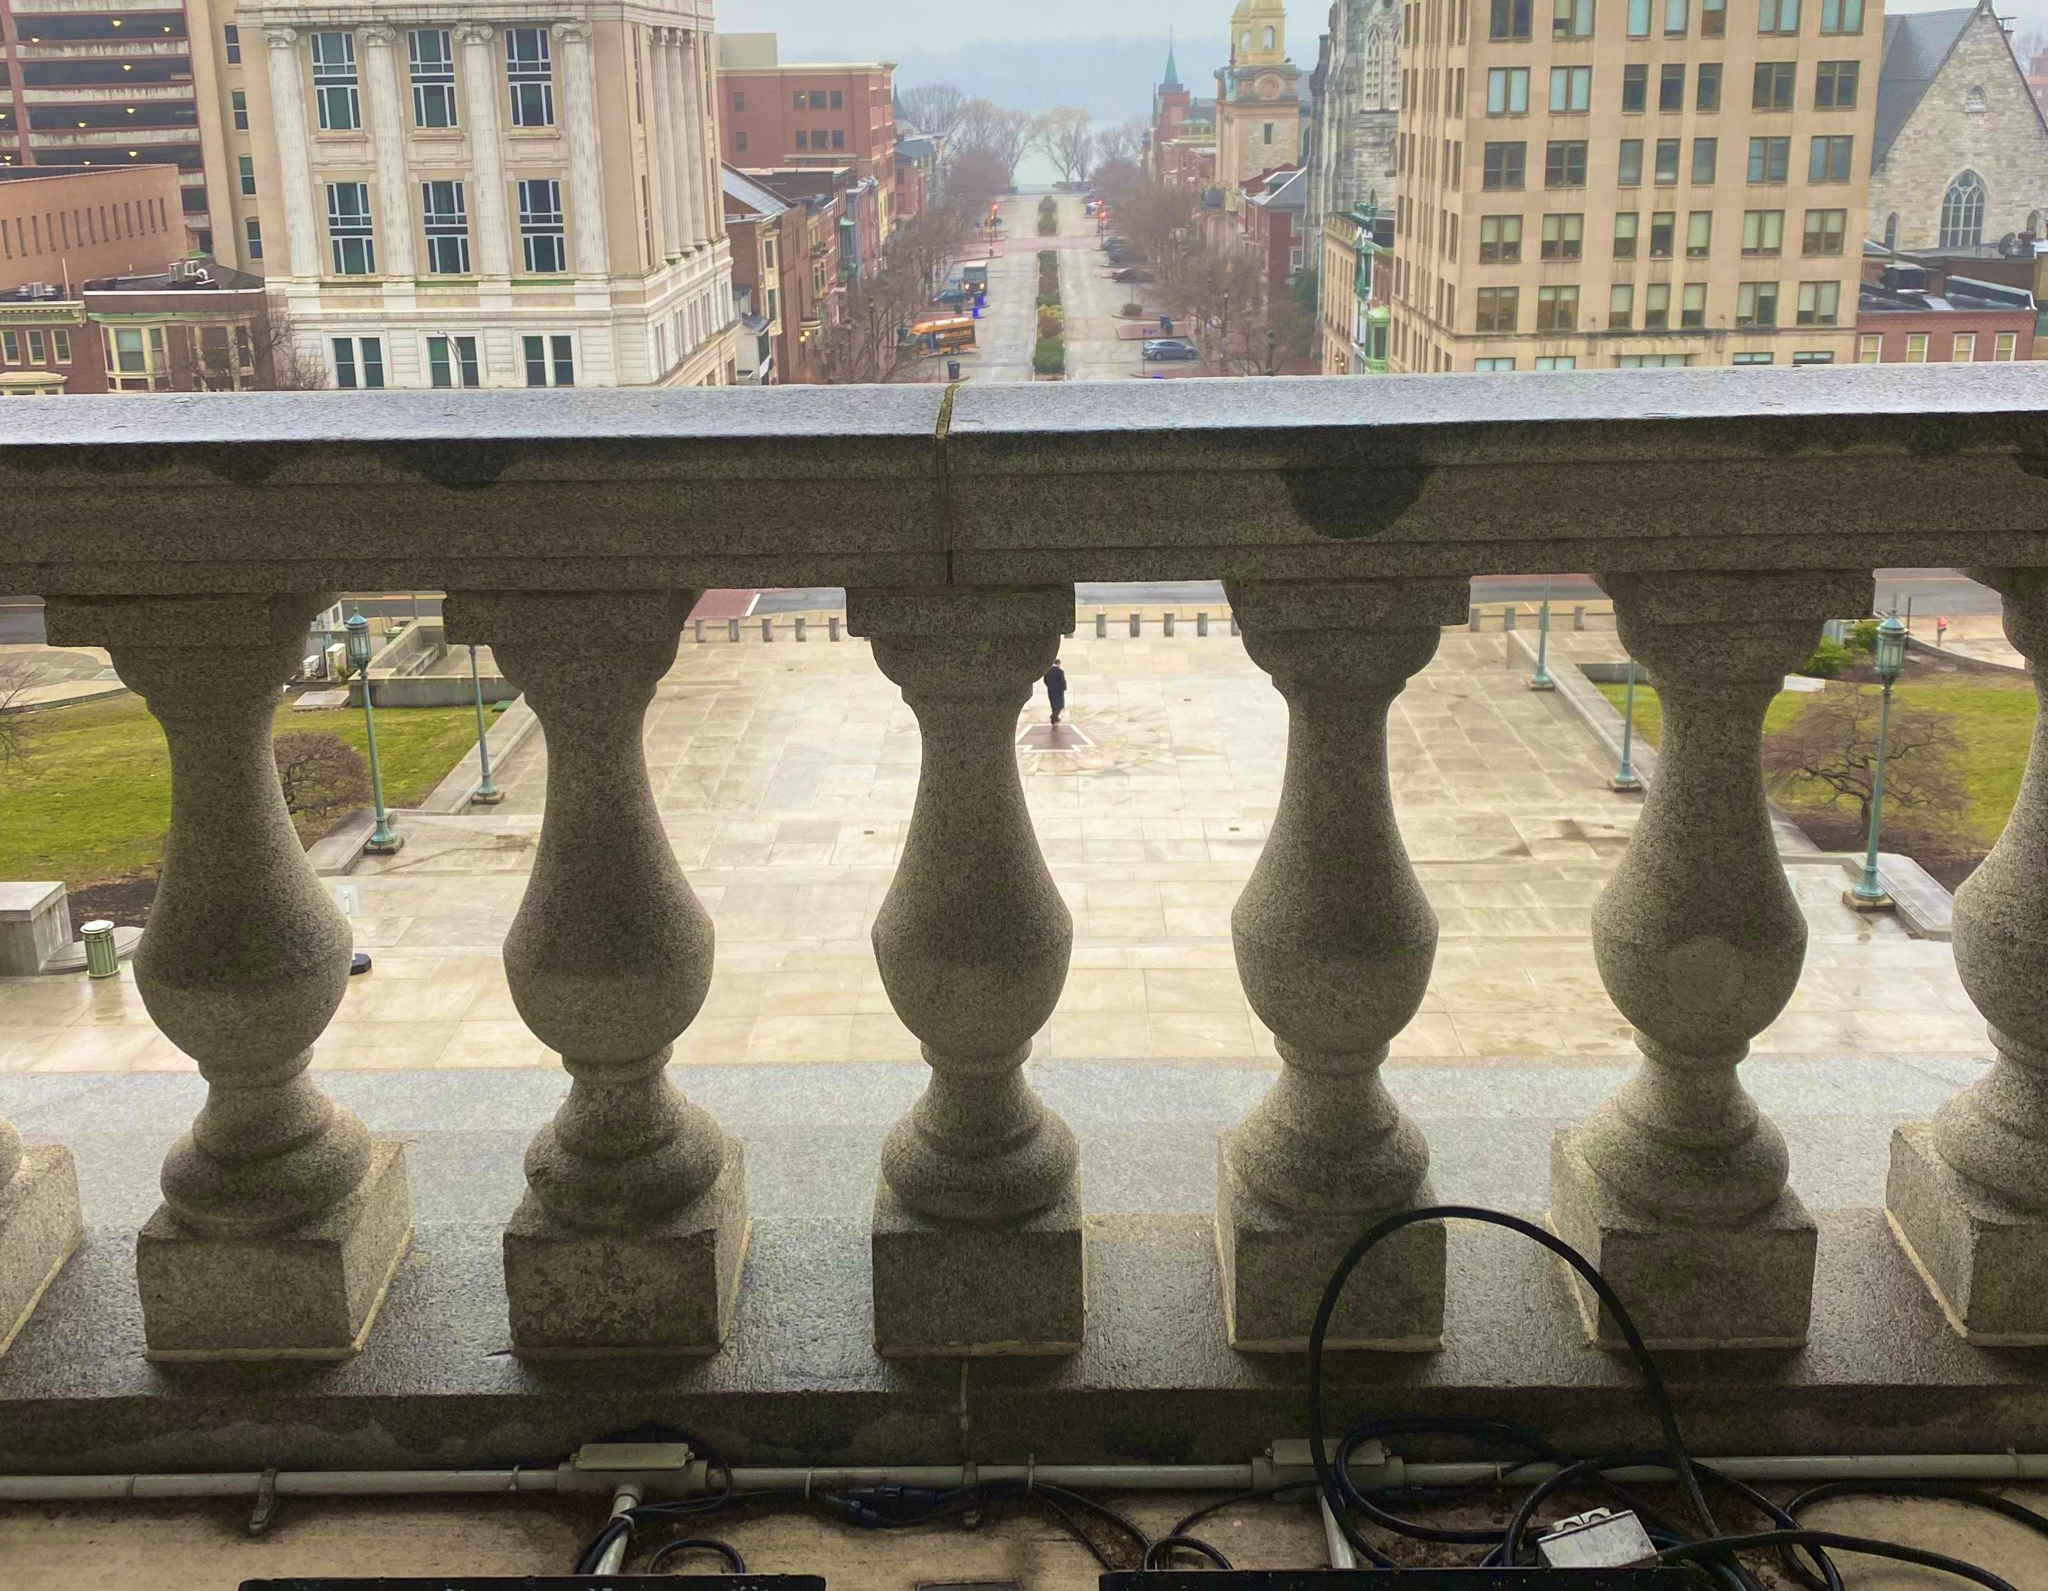 Balcony of PA state capitol with no flags.